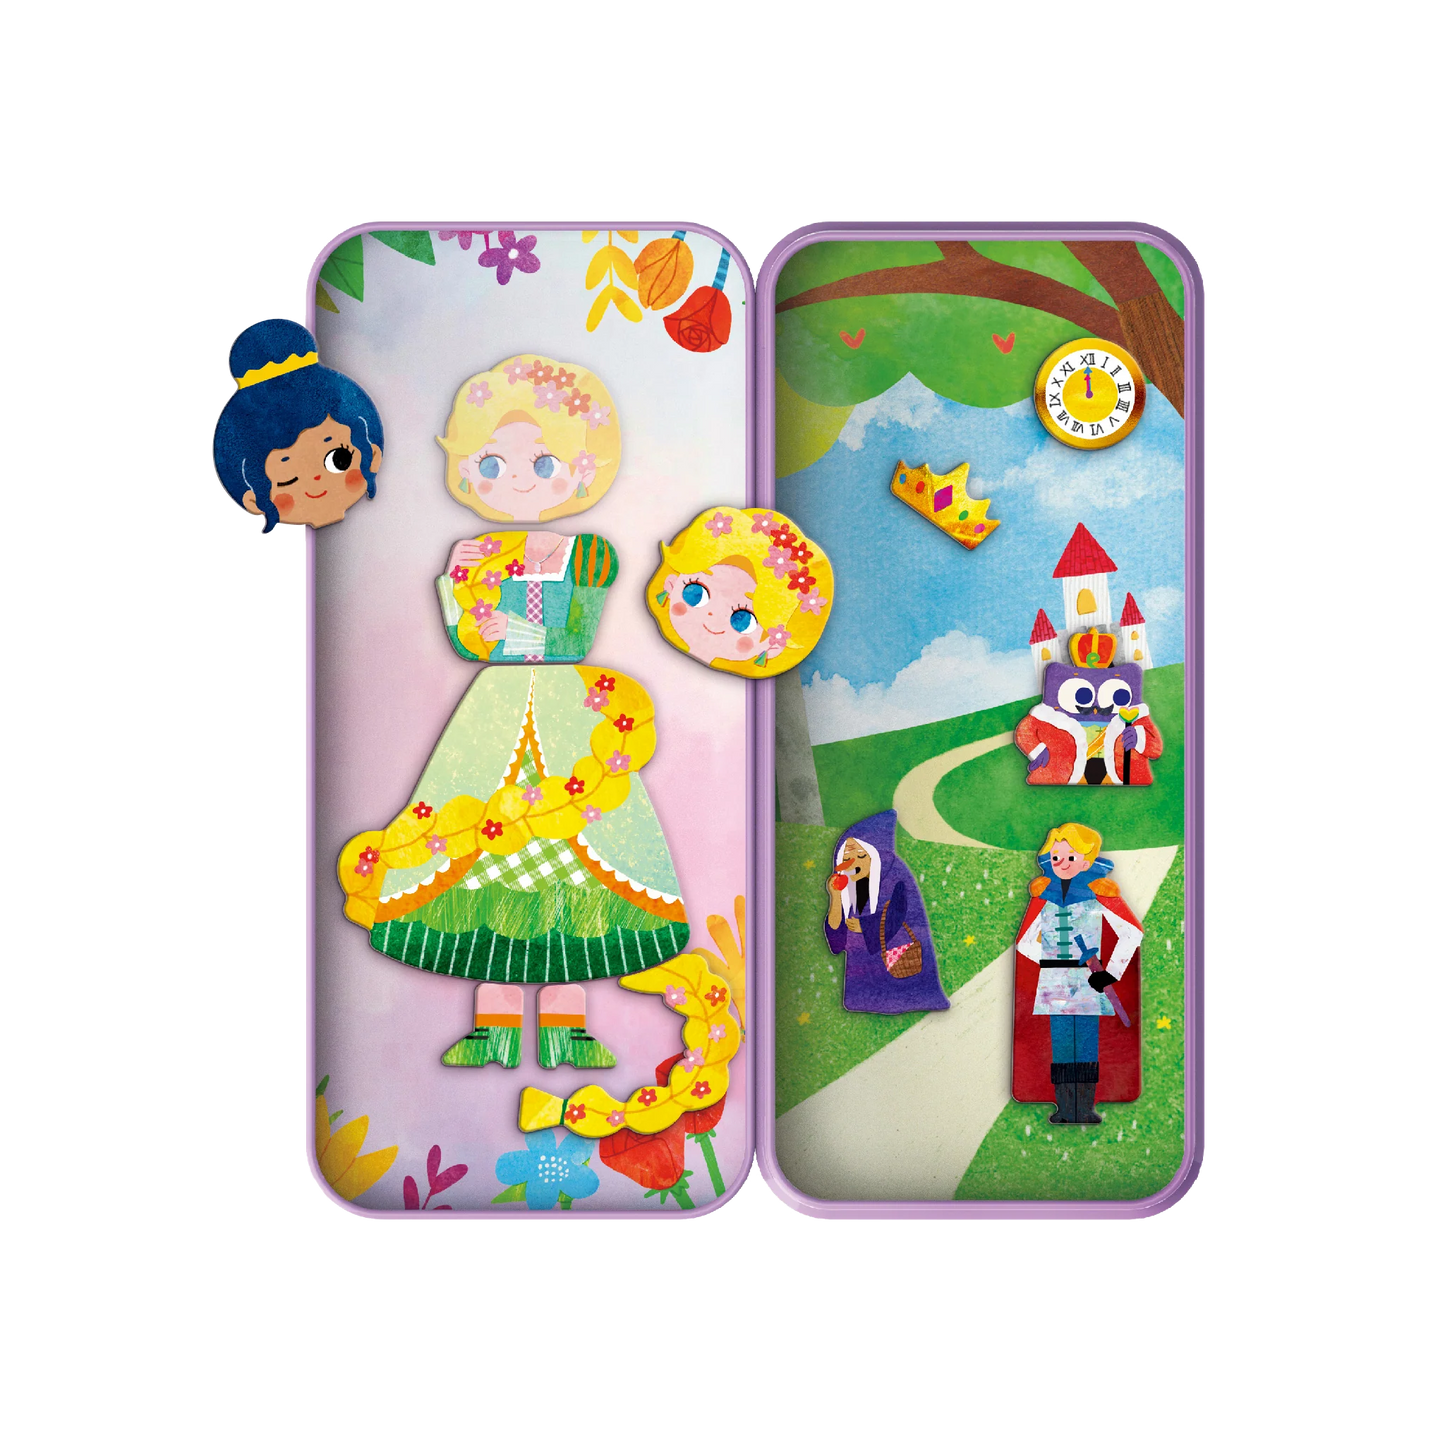 mierEdu Travel Magnetic Box - Fairy Tales